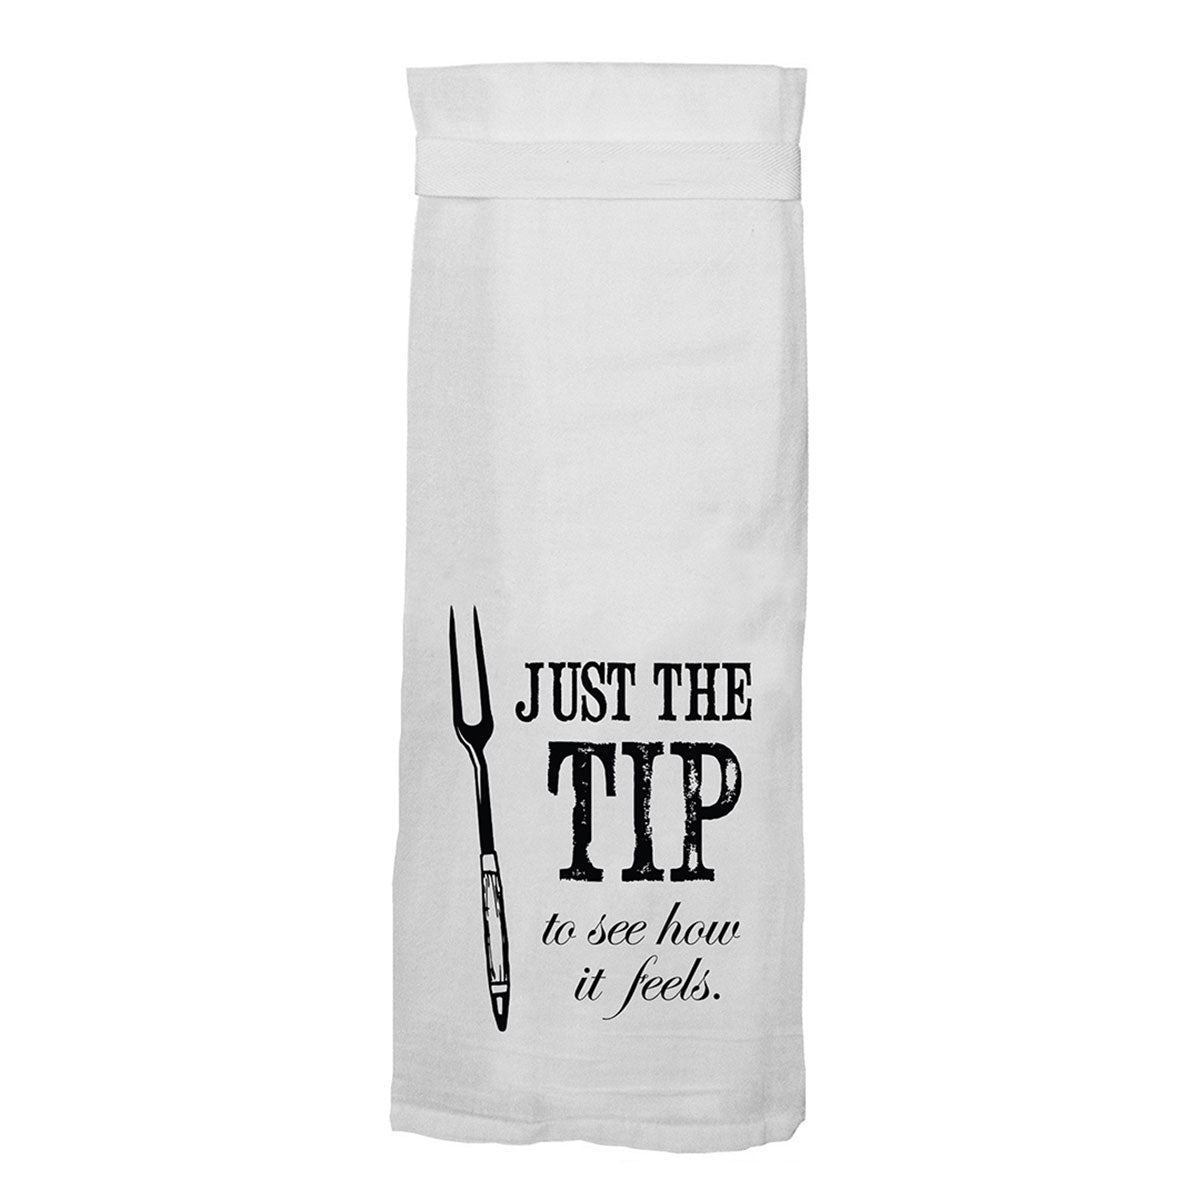 Twisted Wares Just The Tip Flour Towel